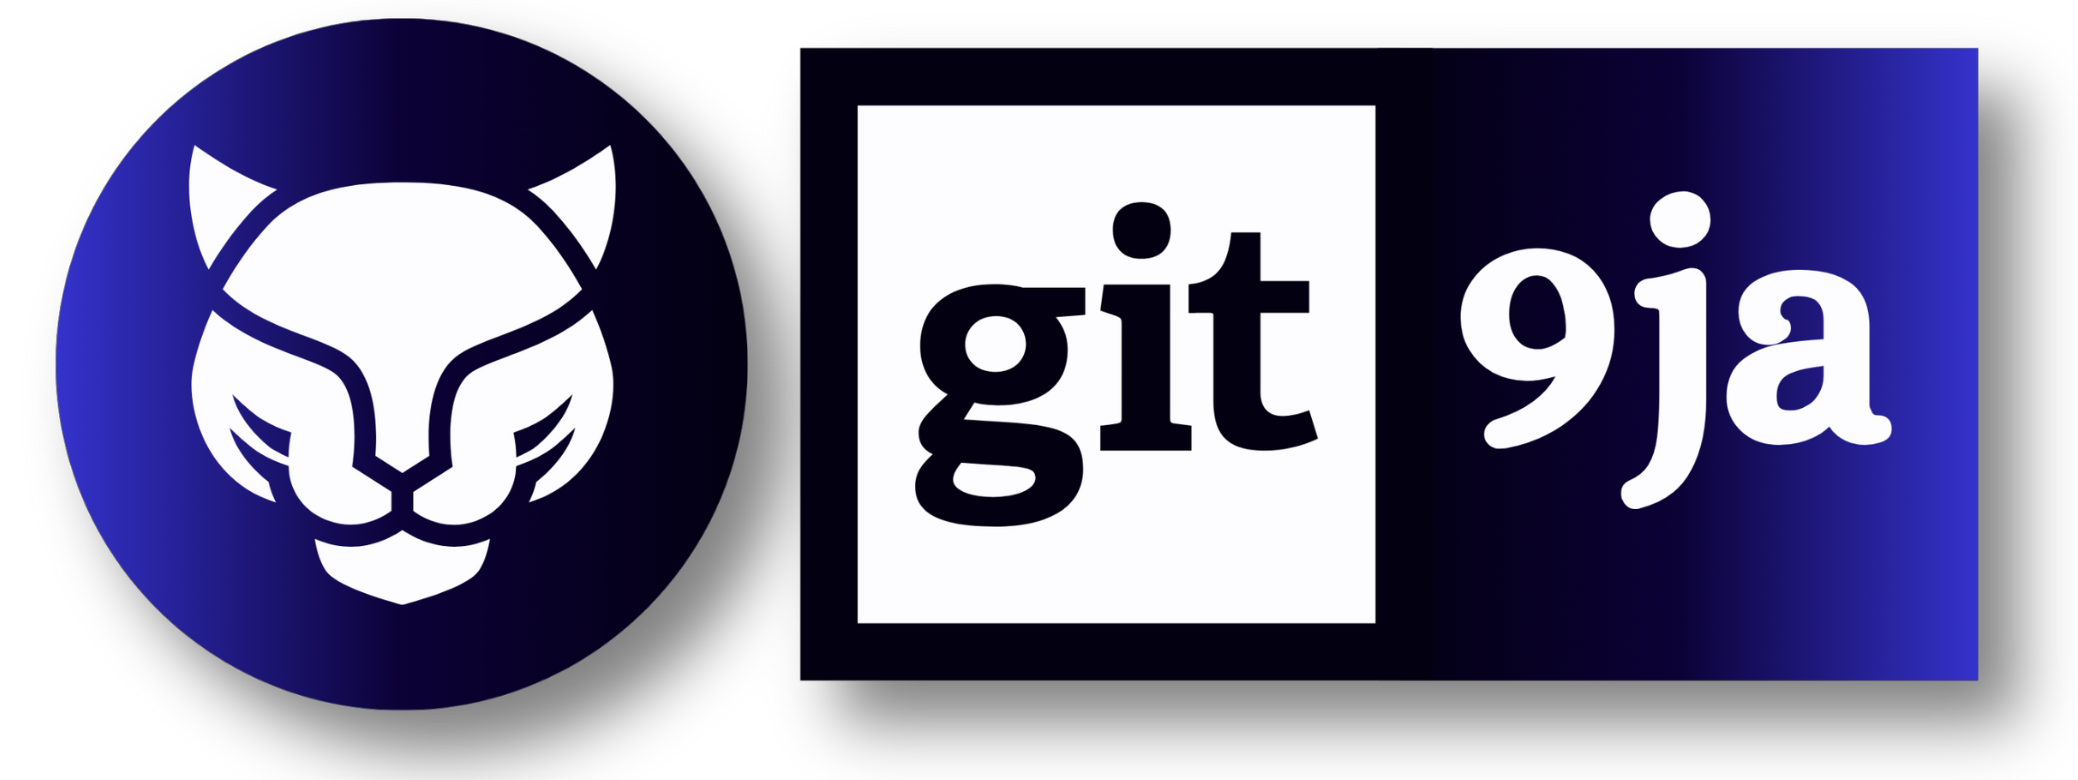 GIT9ja - PHP Scripts, Codes, Solutions, Forums